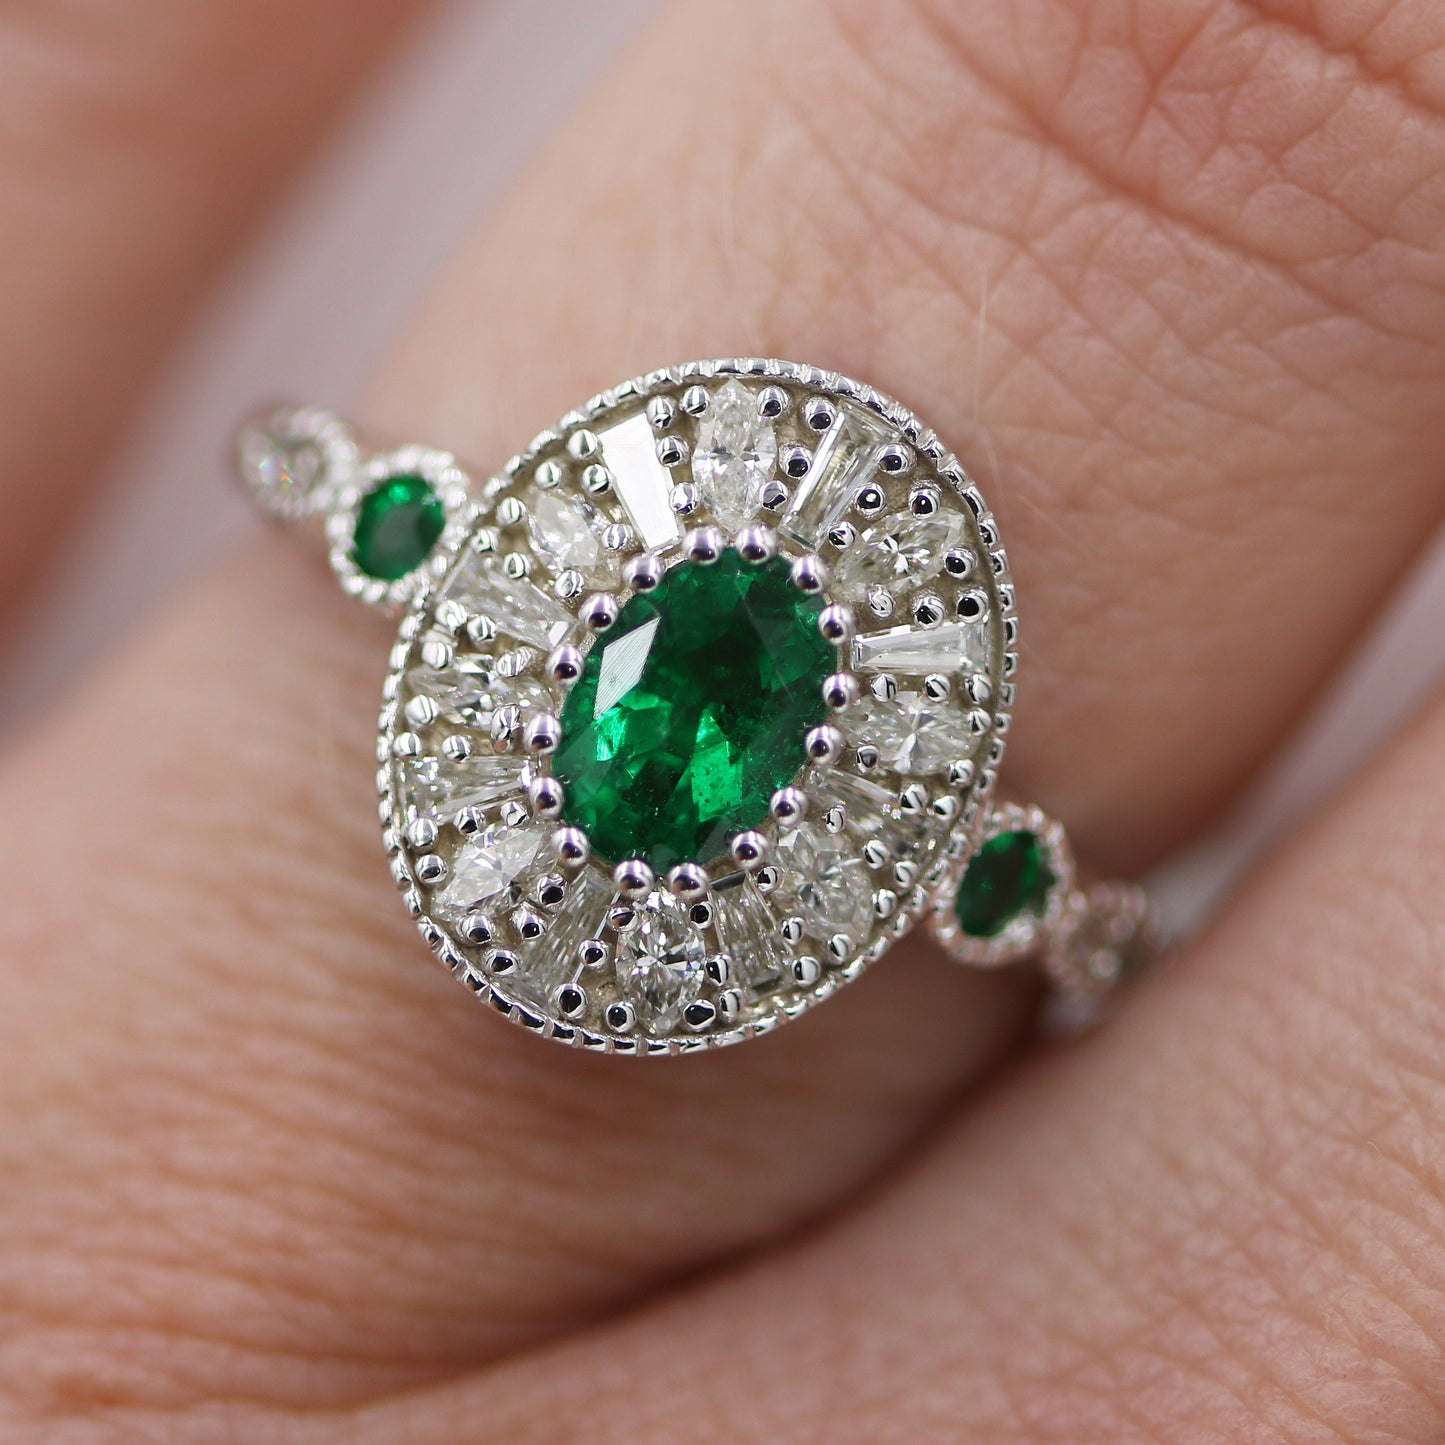 Green Emerald Ring Oval Gemstone Ring Gift For Her Statement & Engagement  Ring | eBay